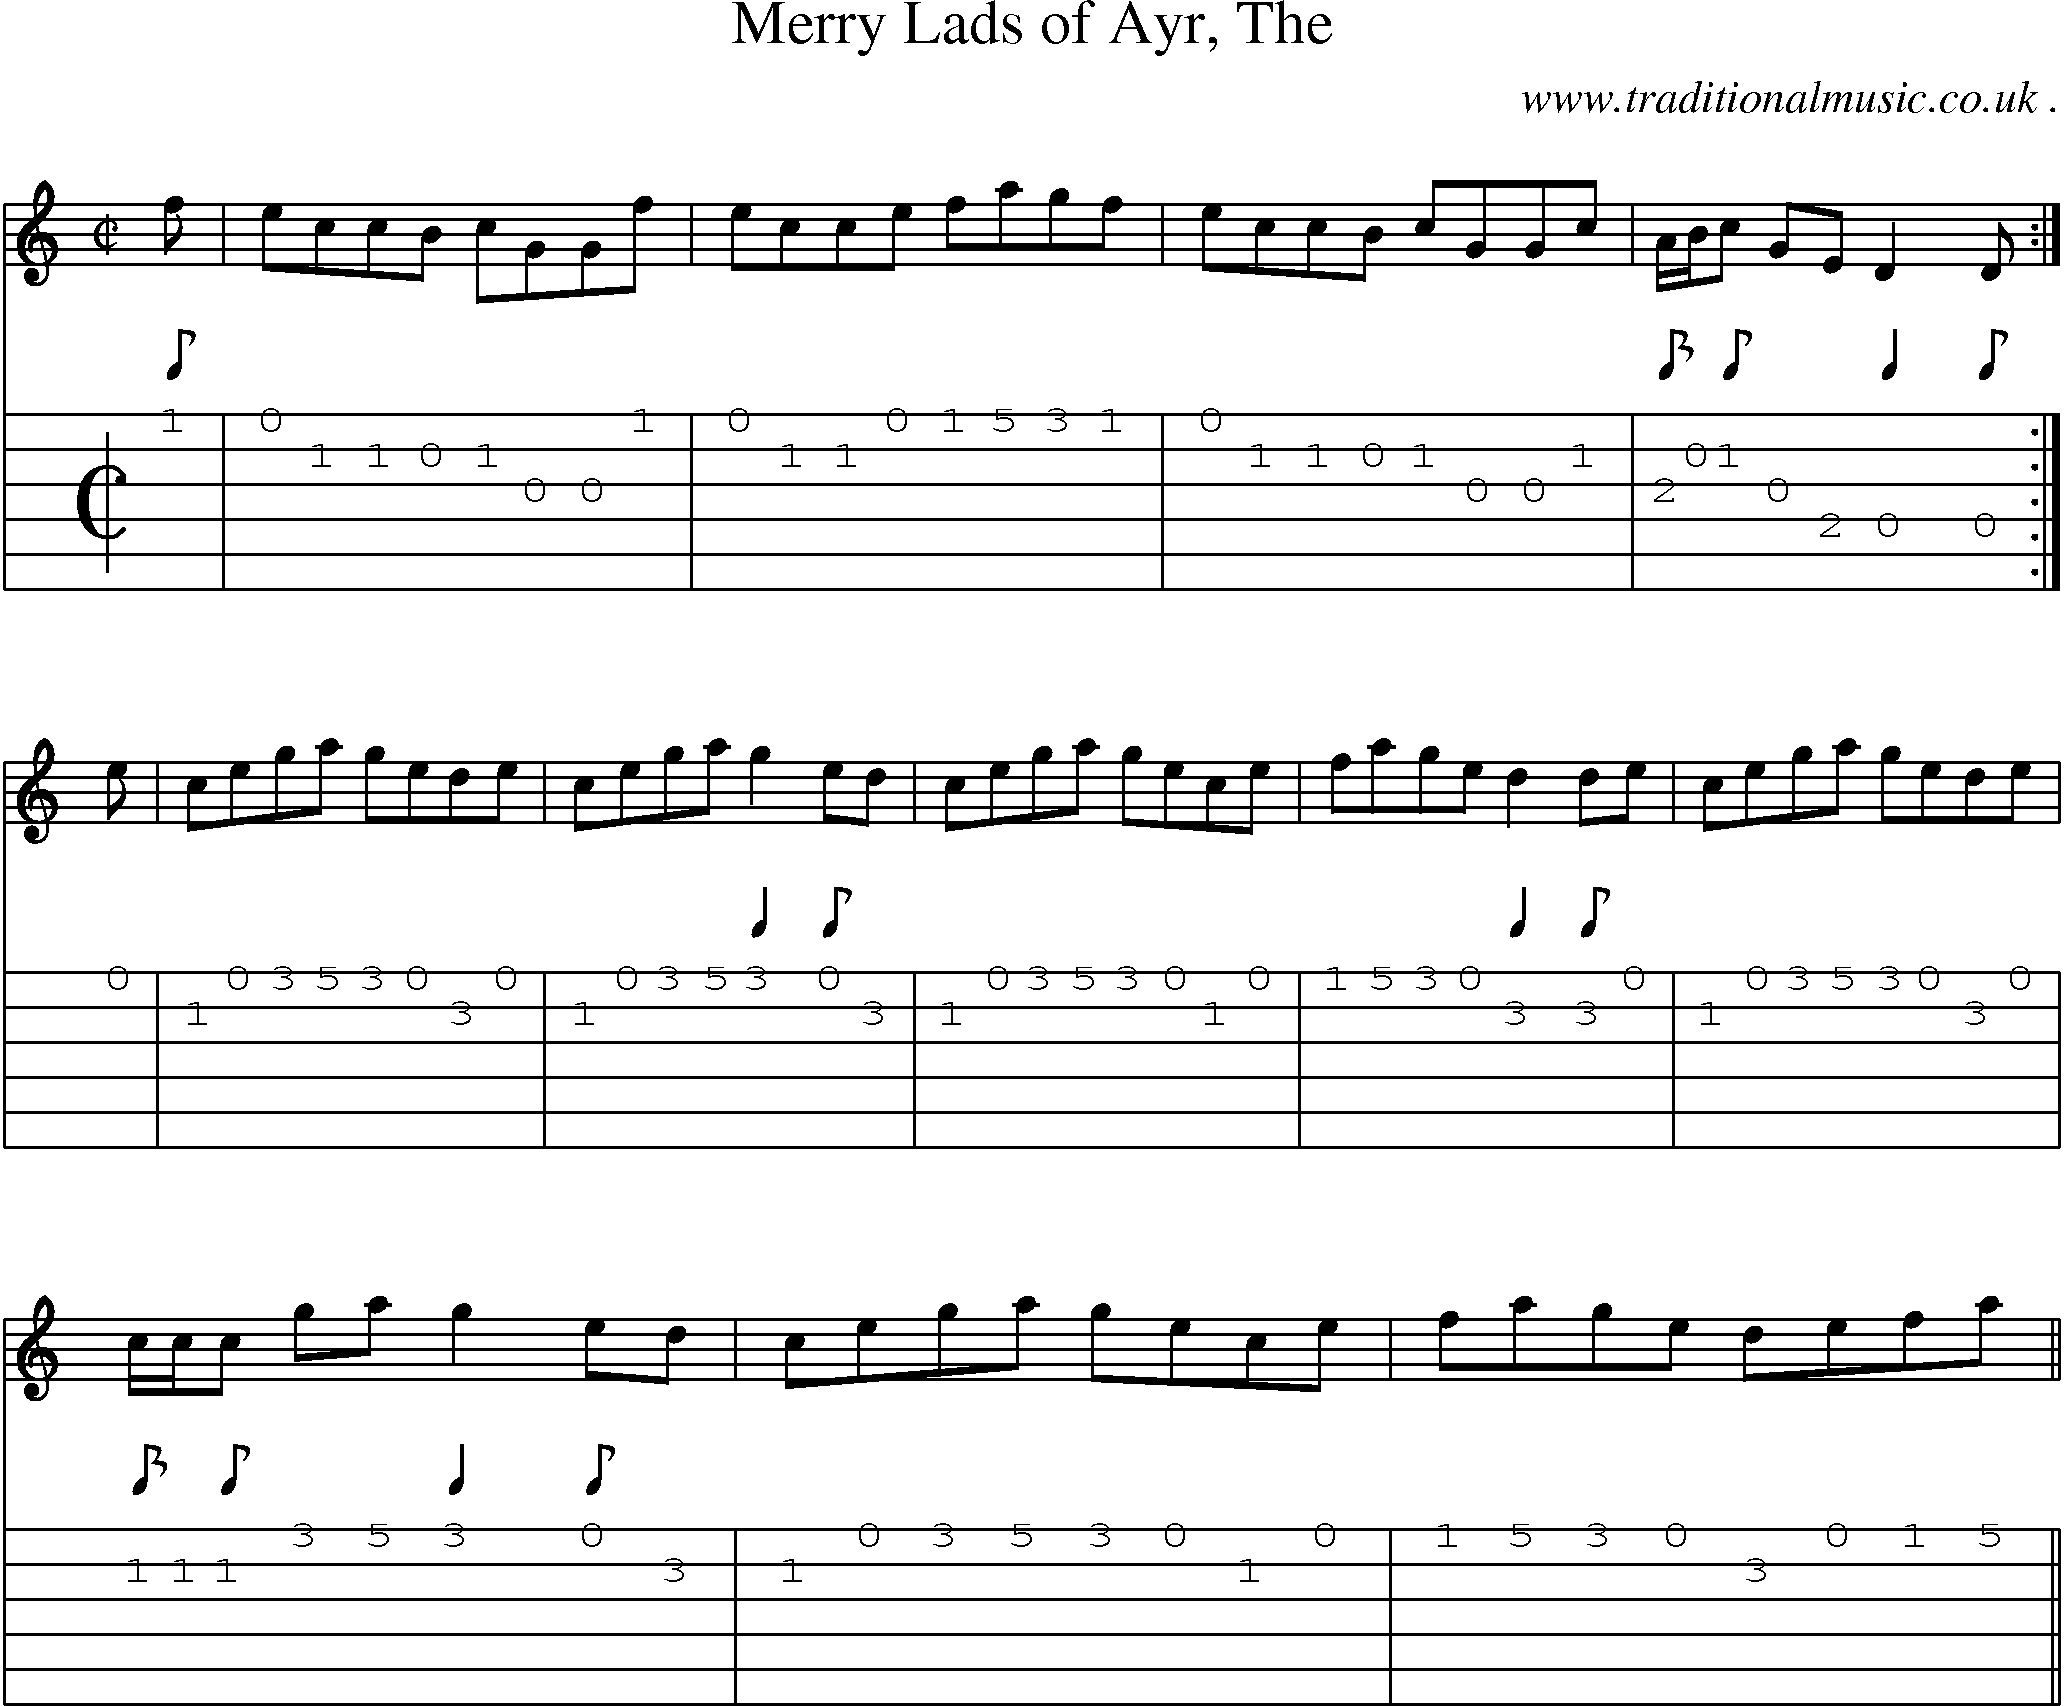 Sheet-music  score, Chords and Guitar Tabs for Merry Lads Of Ayr The